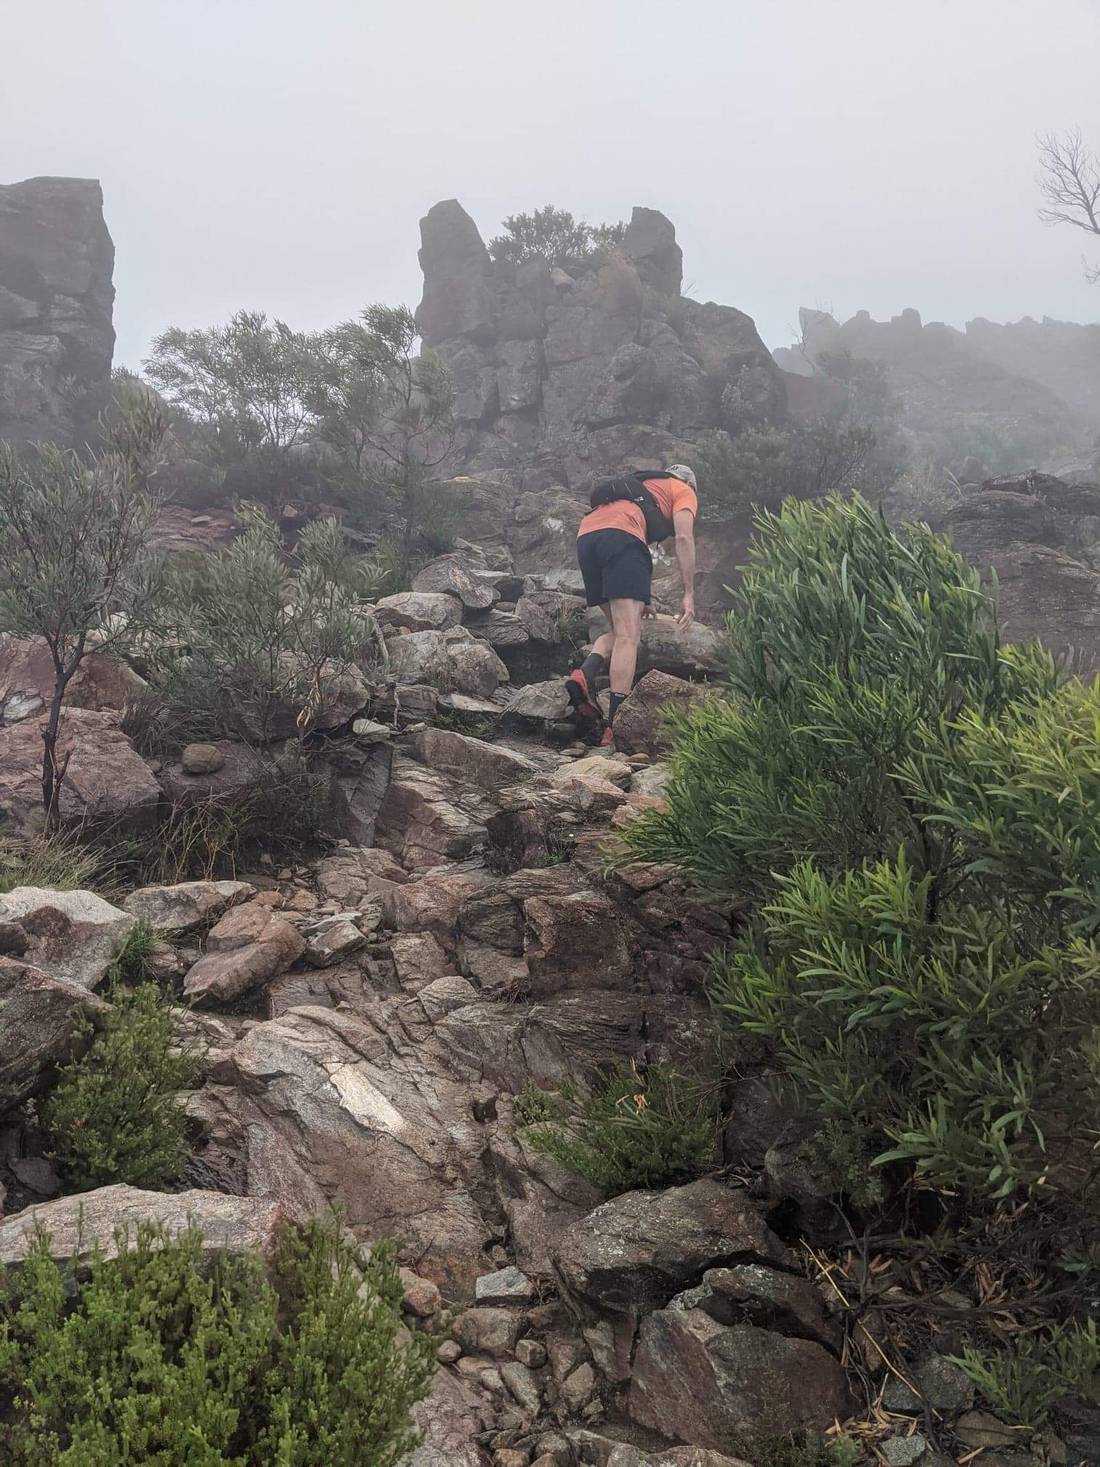 Navigation was a bit harder with all the mist but still a pretty easy, well worn path to follow as long as you paid attention. There was also a little bit of rock scrambling to finally get to the top. A great hike for experienced bushwalkers but not for newbies.